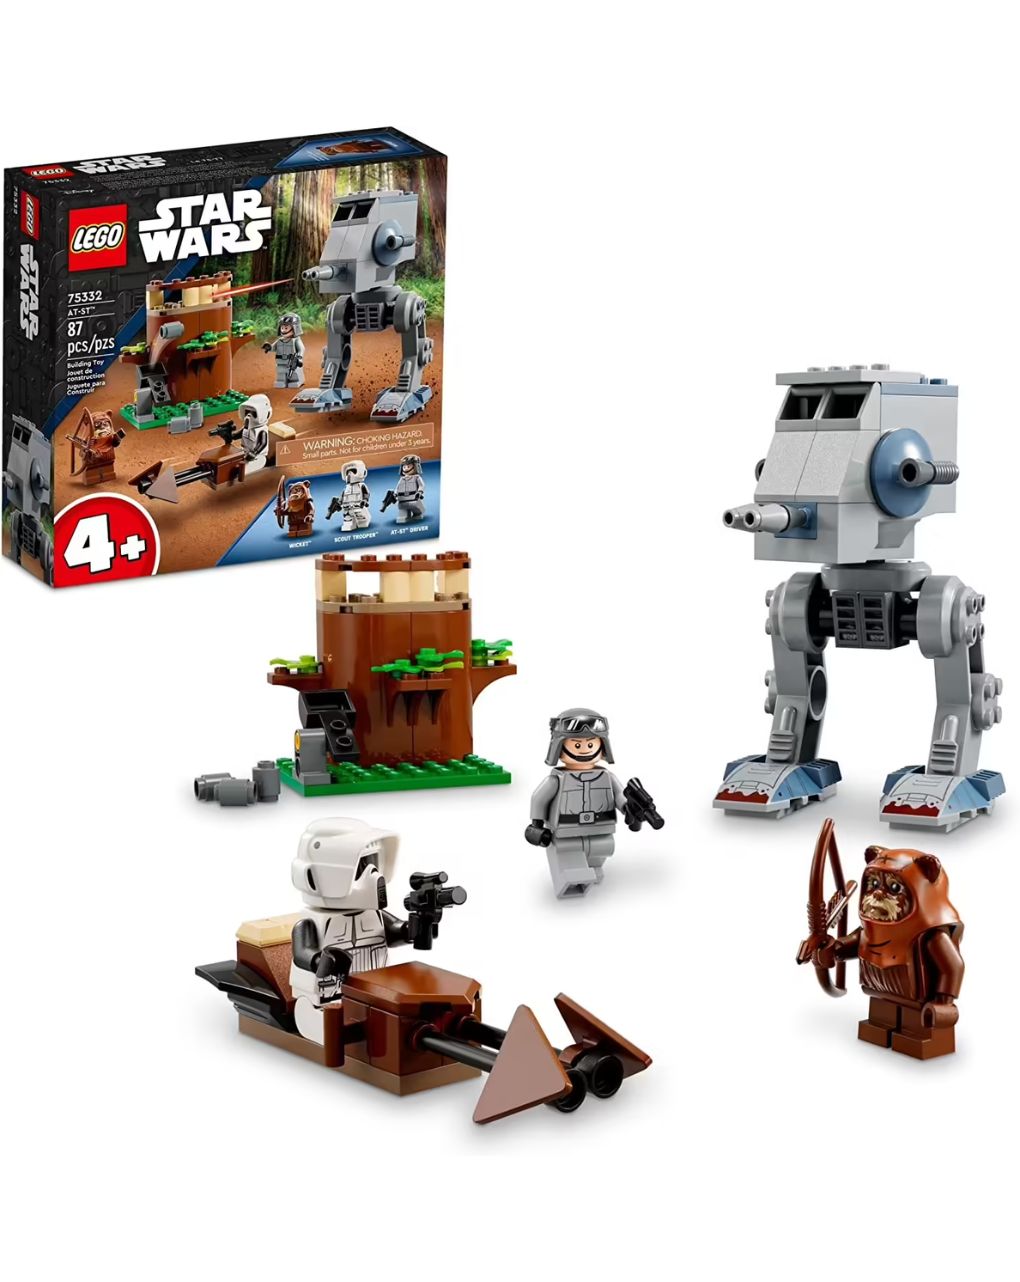 Lego star wars at-st 75332